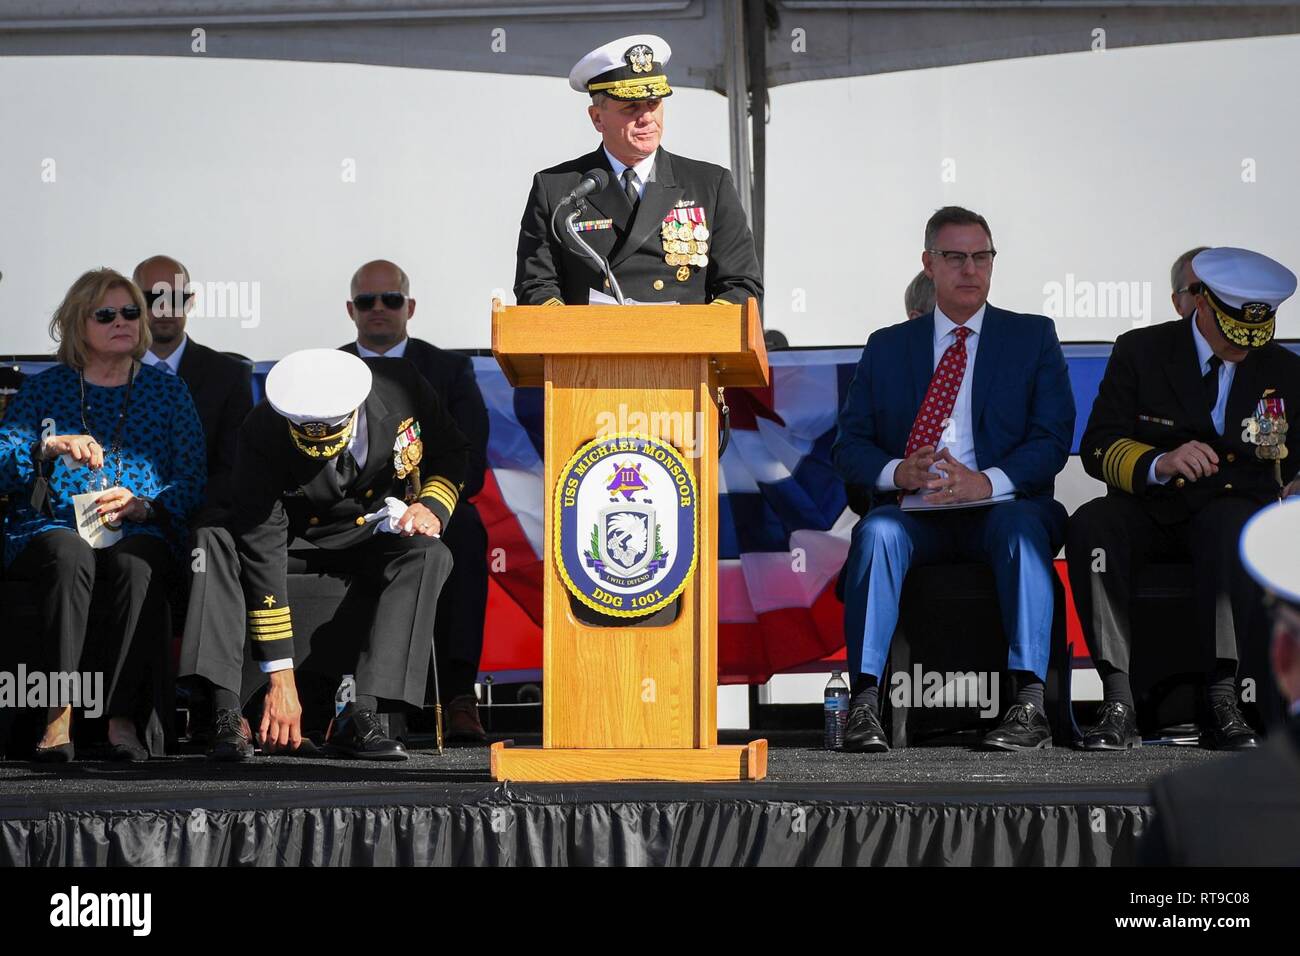 SAN DIEGO (Jan. 26, 2019) Vice Adm. Rich Brown, Commander, Naval Surface Force, U.S. Pacific Fleet, delivers the welcoming remarks during the commissioning ceremony of USS Michael Monsoor (DDG 1001). DDG 1001 is the second Zumwalt-class destroyer ship to enter the fleet. It is the first Navy combat ship named for fallen Master-at-Arms 2nd Class (SEAL) Michael Monsoor, who was posthumously awarded the Medal of Honor for his heroic actions while serving in Ramadi, Iraq, in 2006. Stock Photo